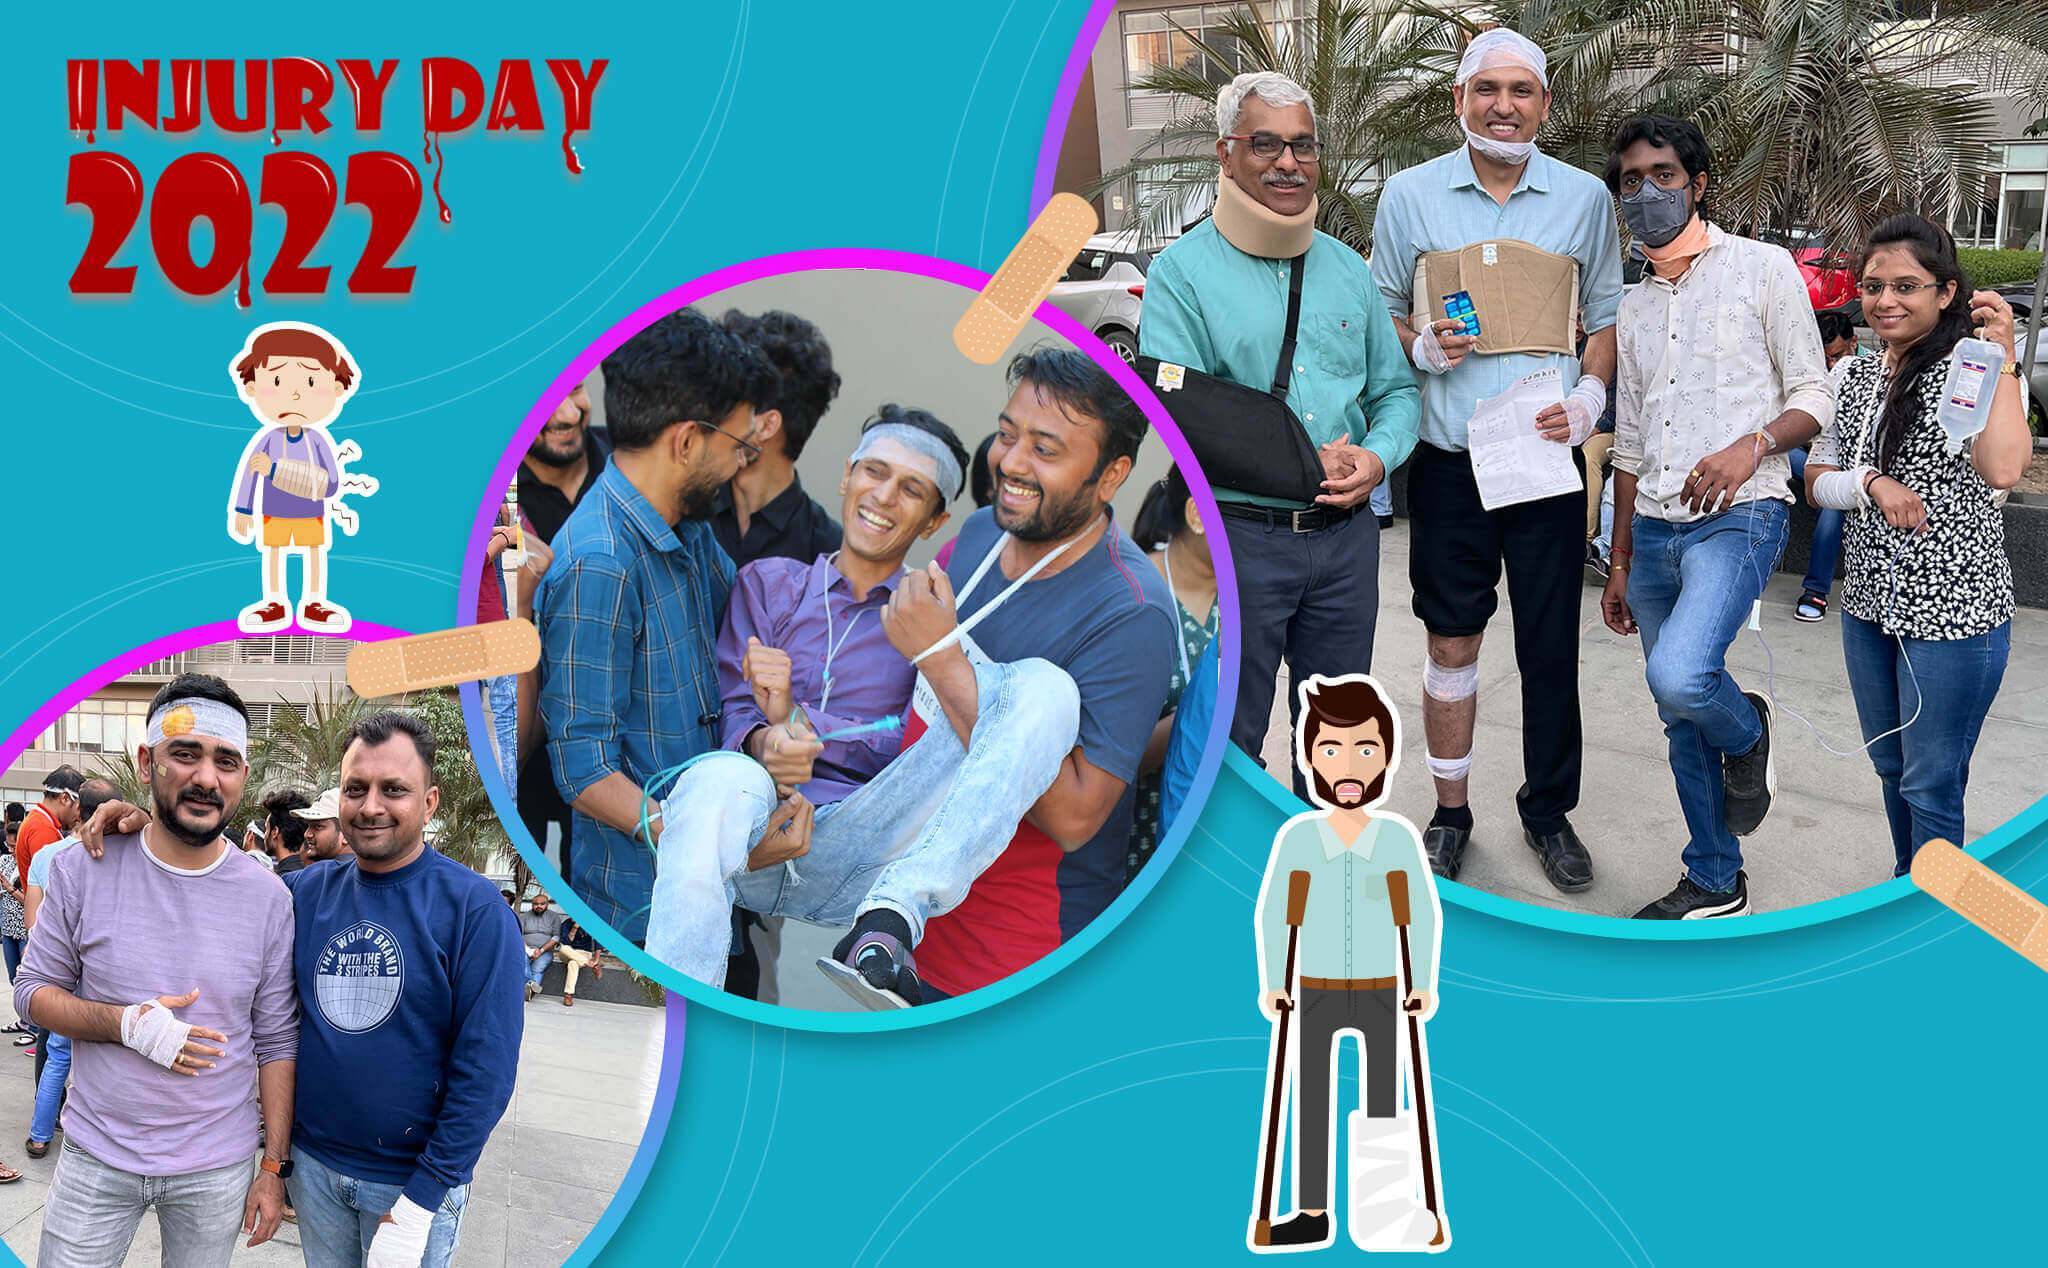 Silicon family celebrated Injury Day with a lot of enjoyment! Yes, at Silicon, we know to maintain a work-life balance.